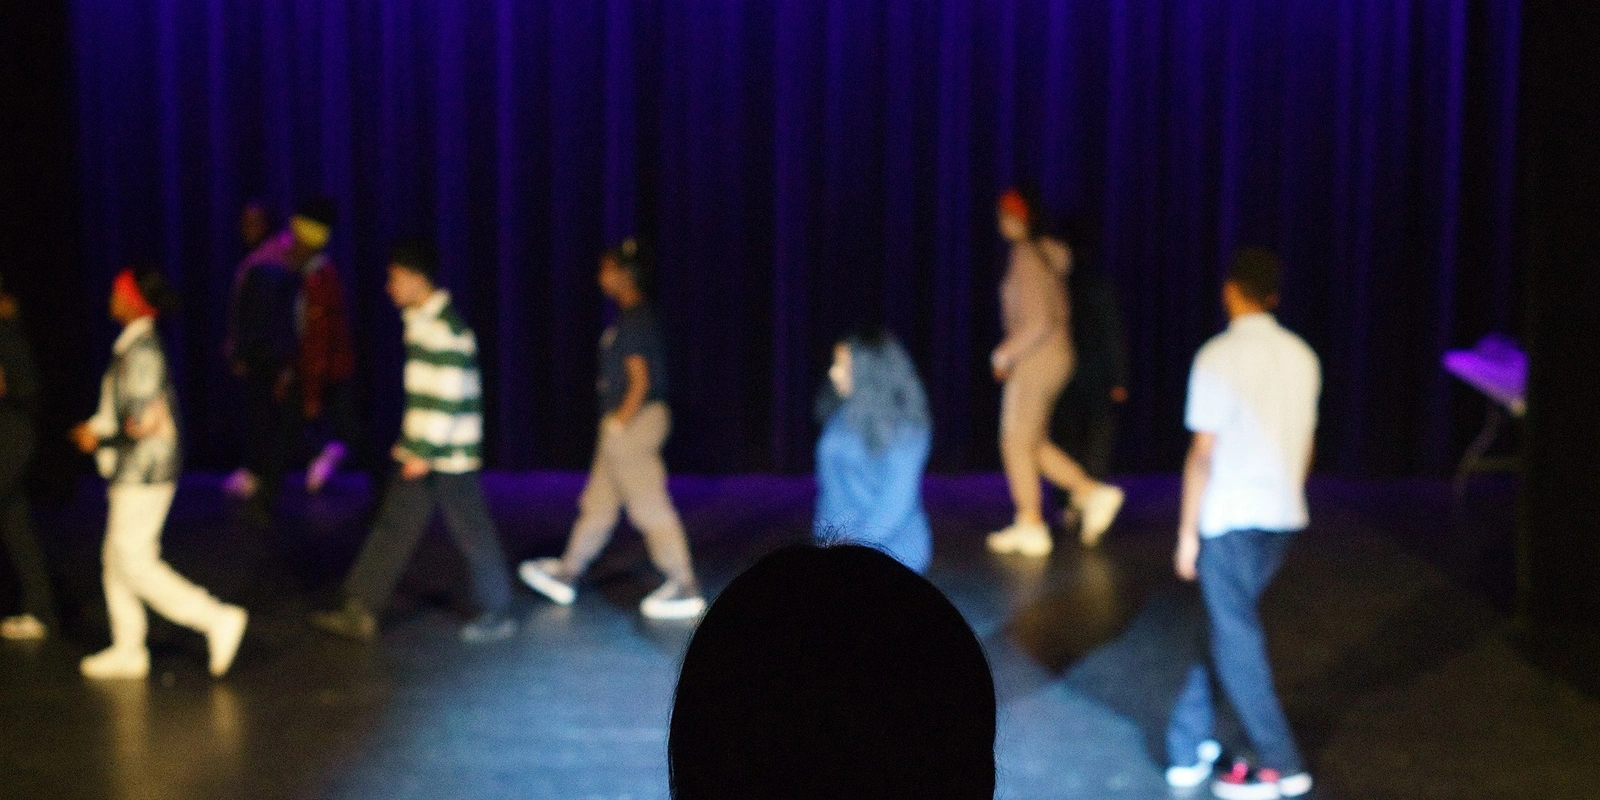 Newcomer Youth Theatre Program students walking on a stage during an exercise or performance.